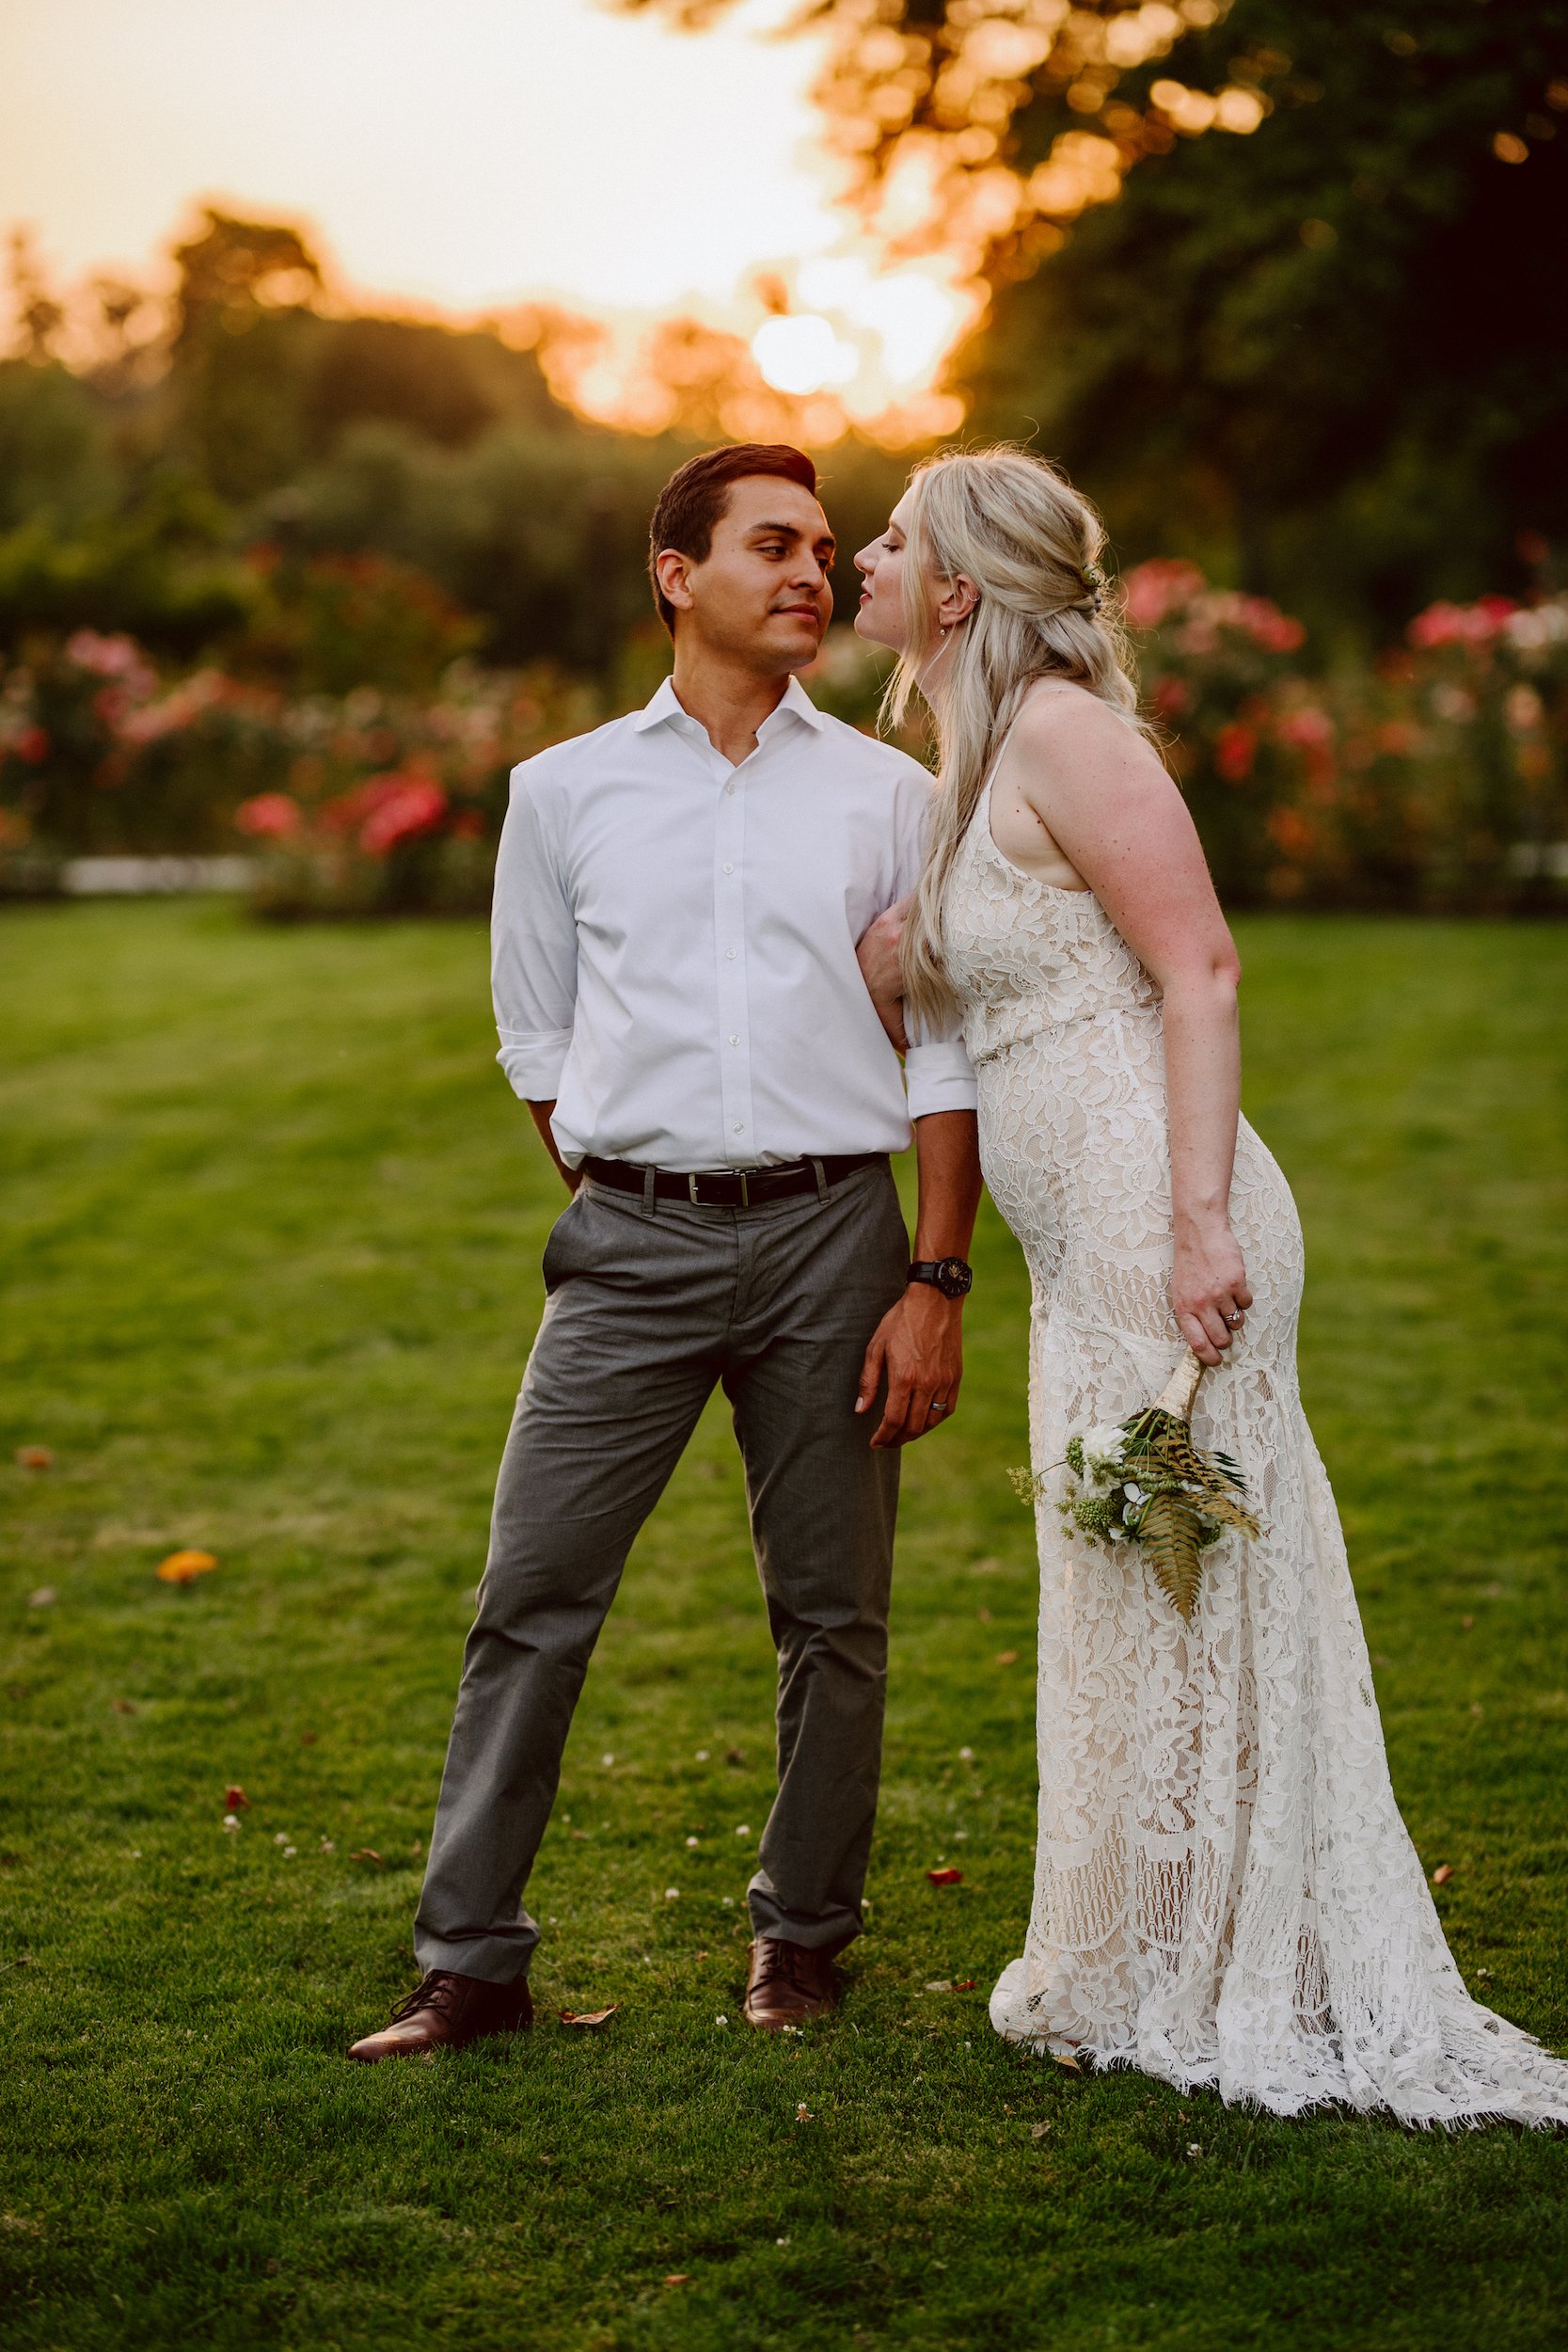 A couple in wedding attire stand together during a golden sunset in a field. They are looking at each other lovingly and standing very close to one another.